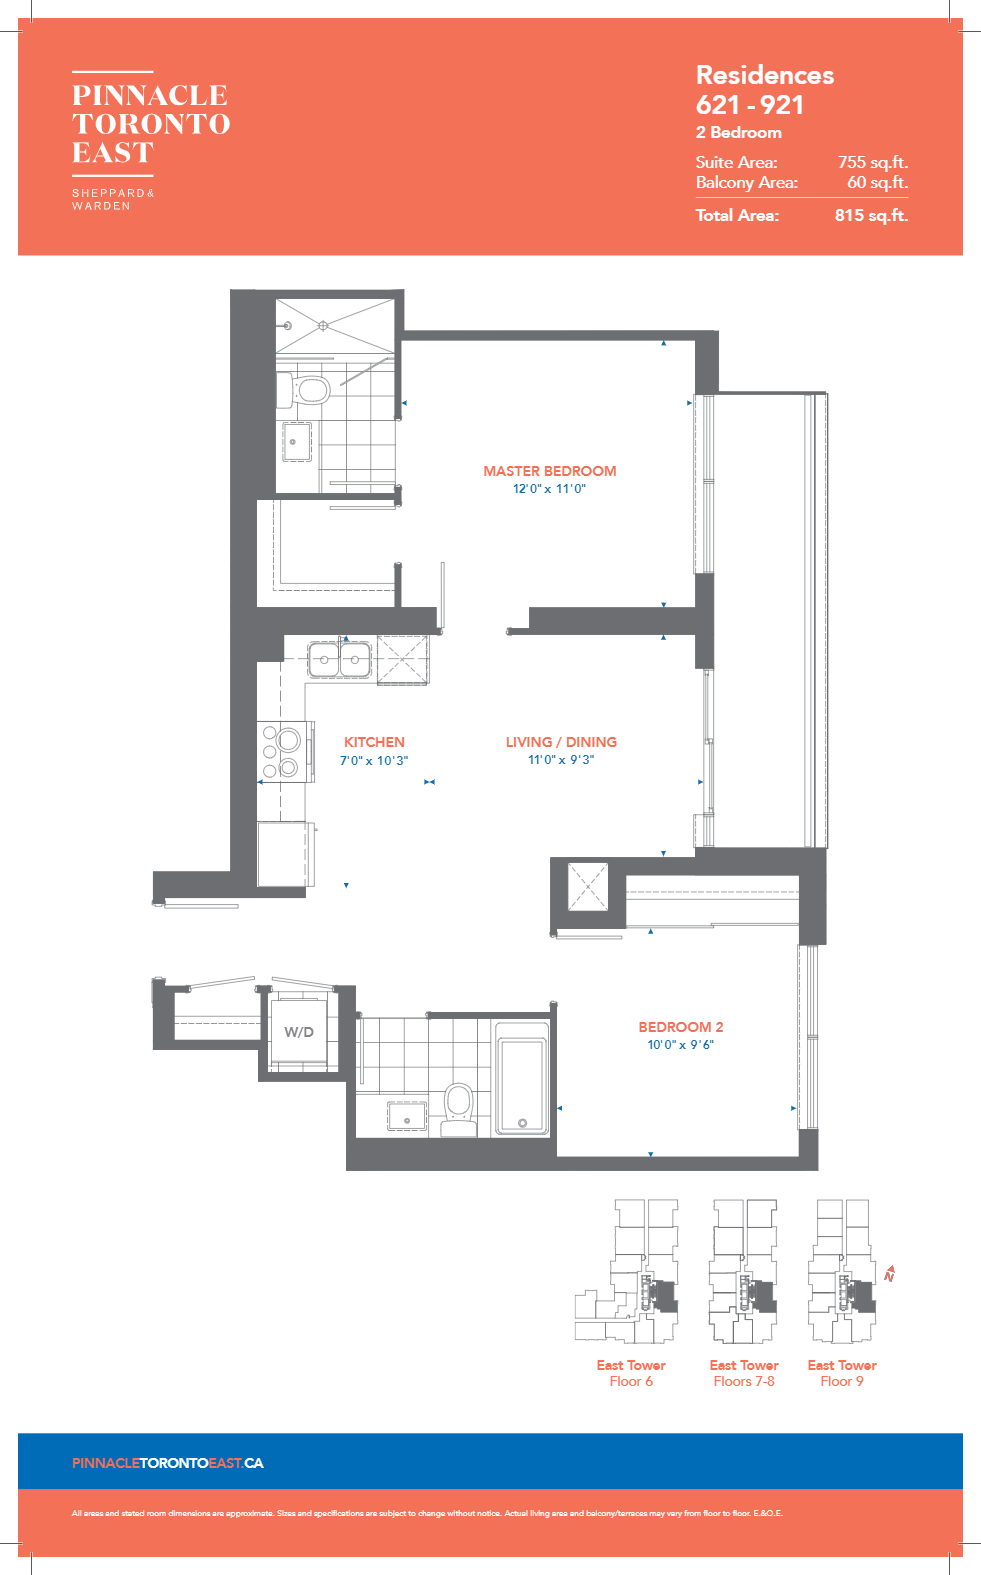 Residences 621-921 Floor Plan of Pinnacle Toronto East Condos with undefined beds